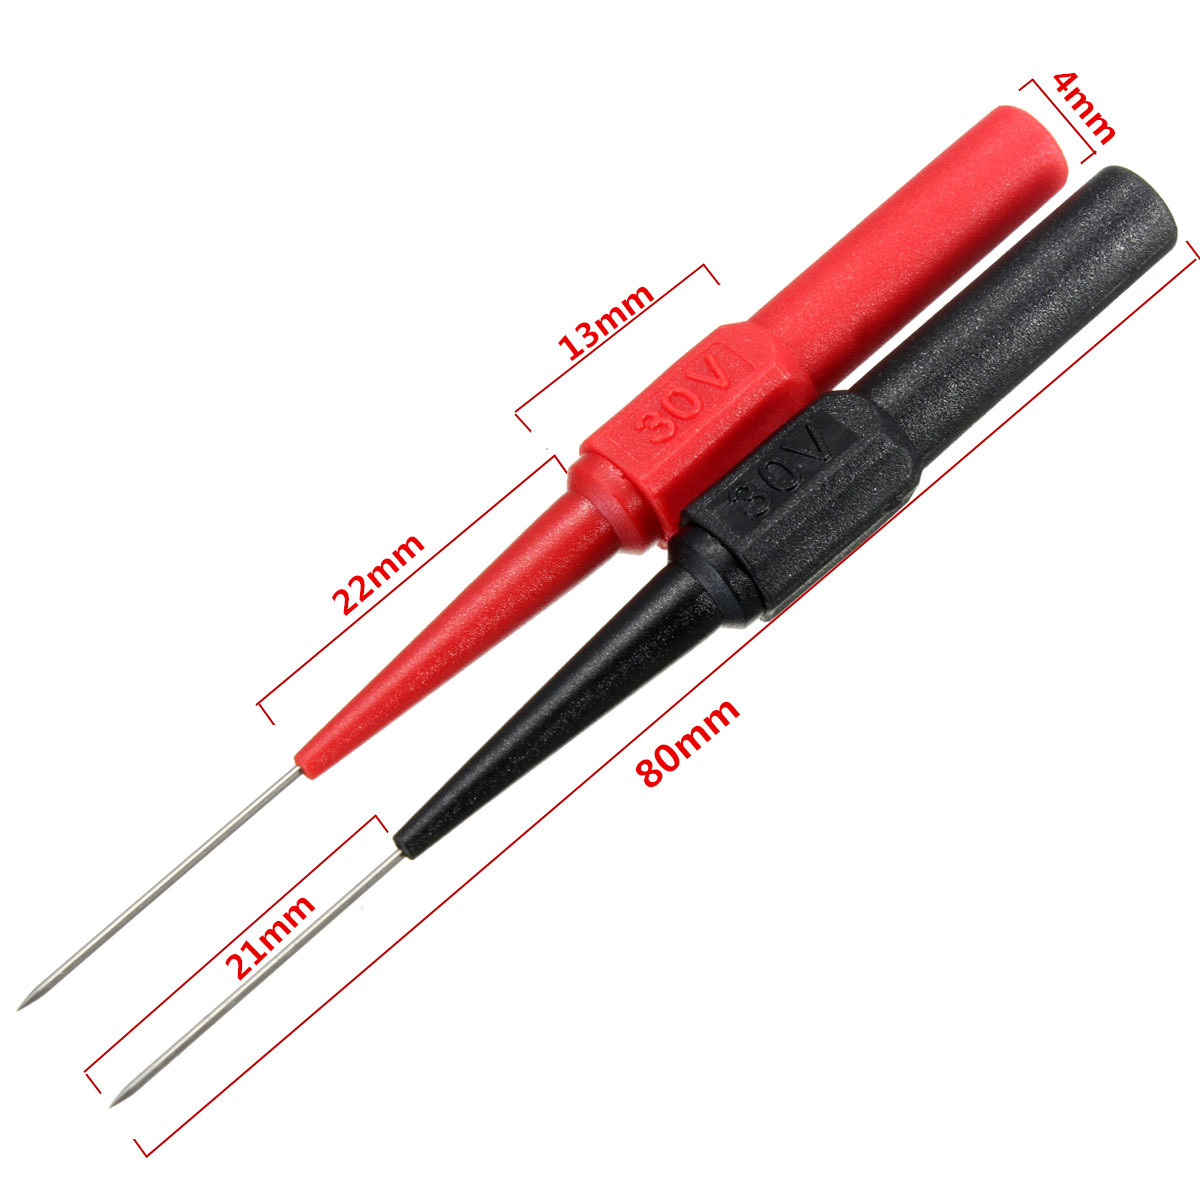 4MM Socket Piercing Needle Test Clip Probe 2Pcs Insulation Piercing Test Clip Multimeter Testing Clip Probes P5005 Fully Insulated Quick Pierce Testing Clips Multimeter Spring Load 